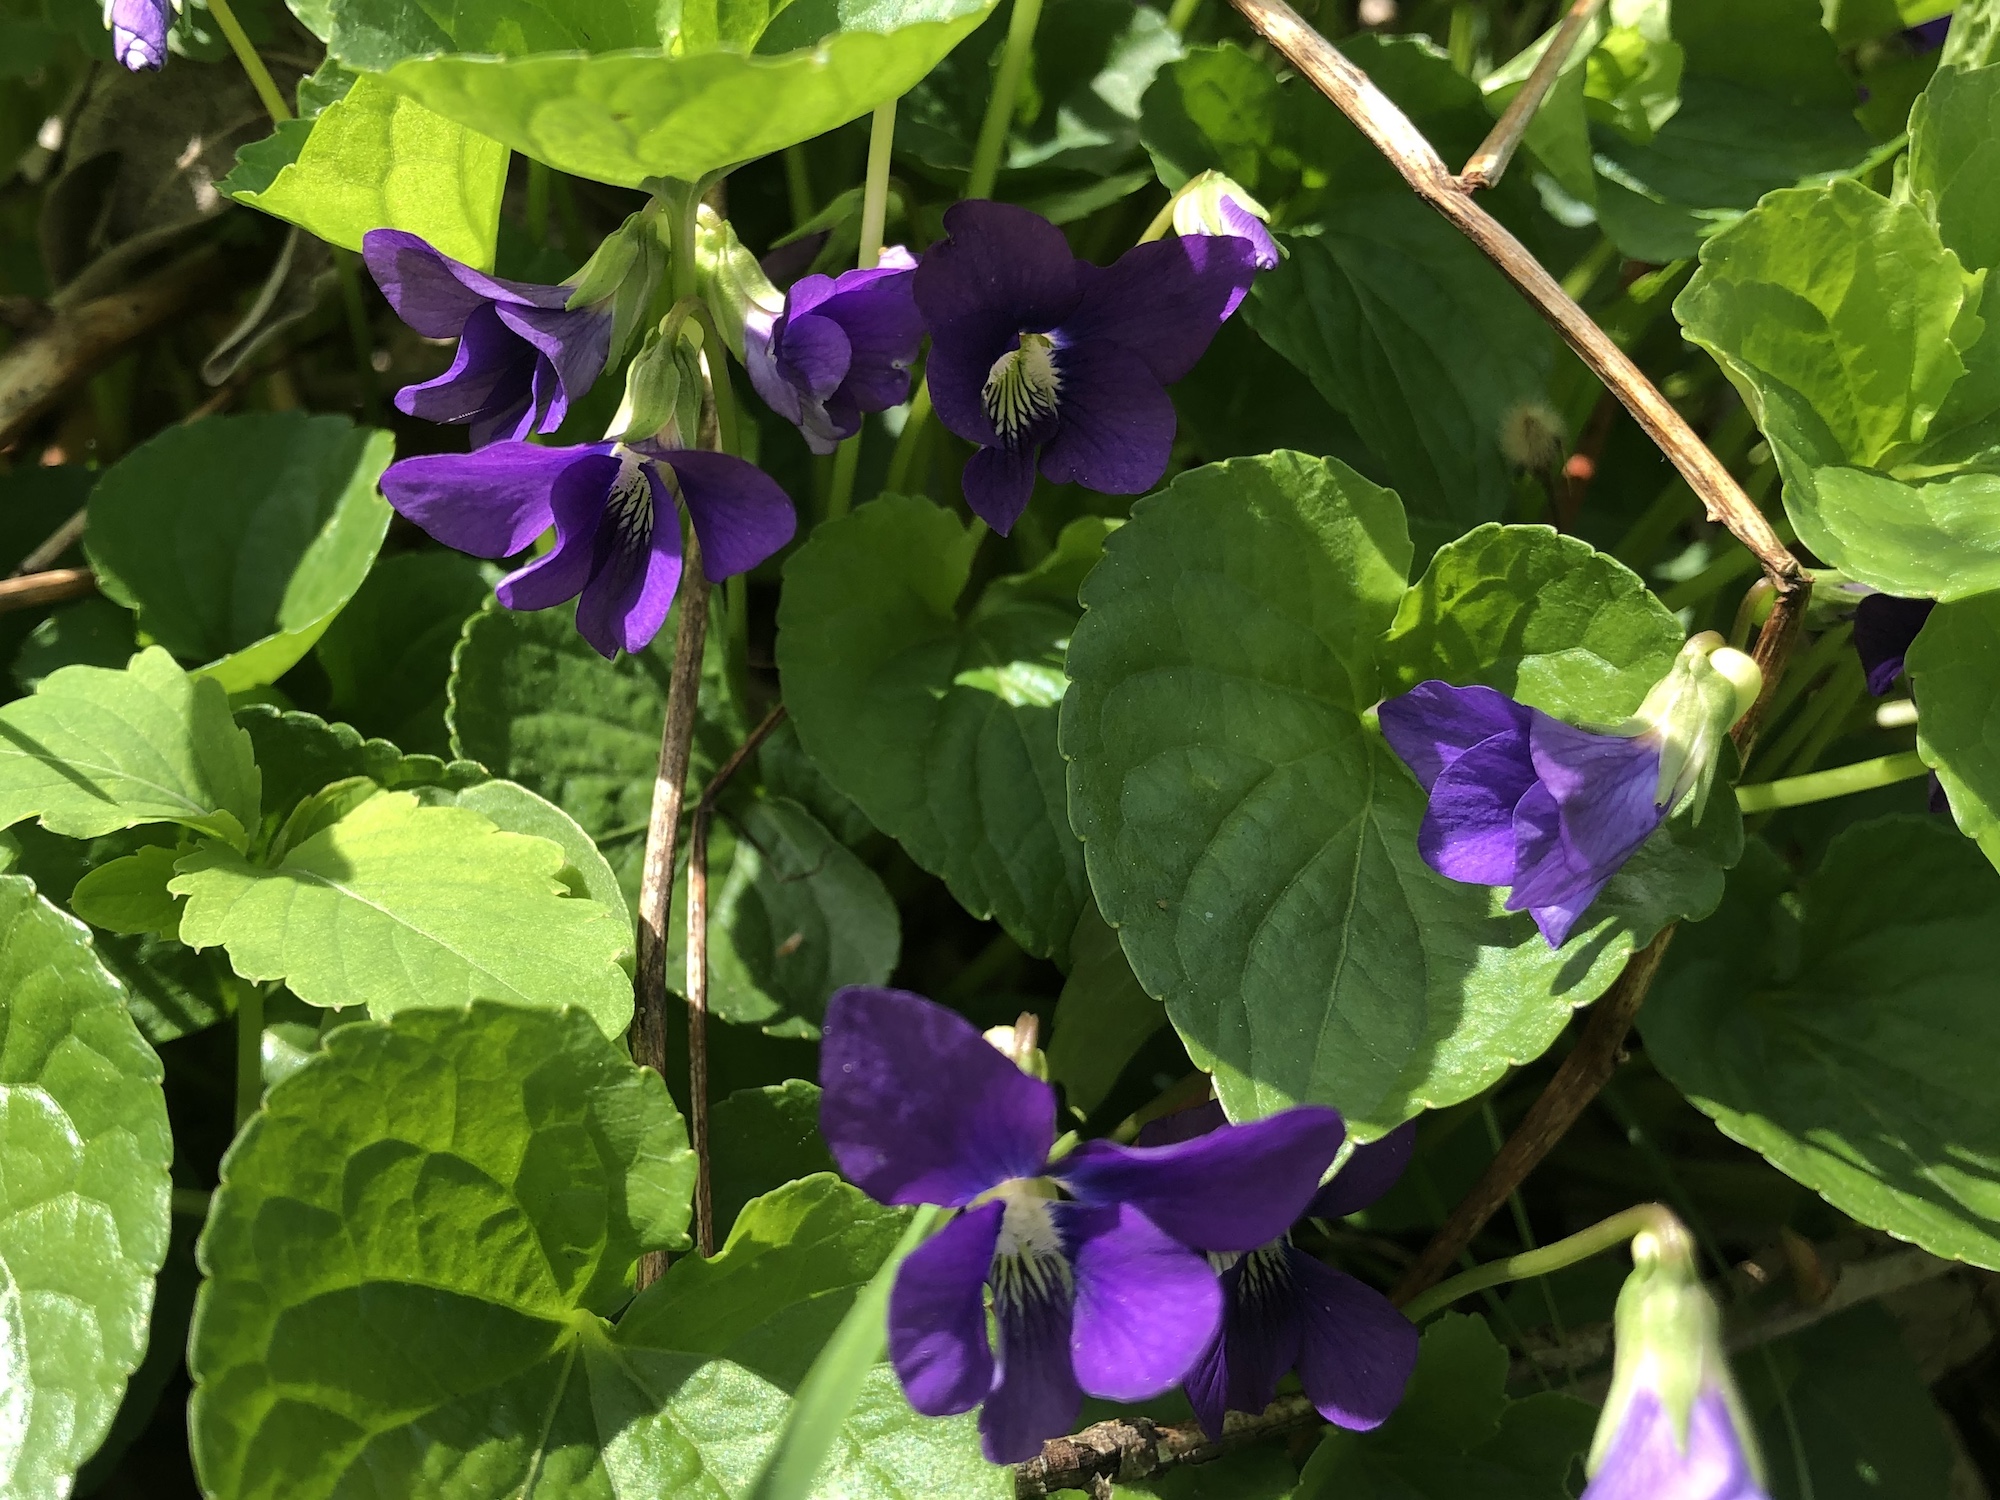 Wood Violets near Council Ring, the Oak Savanna and the Duck Pond on May 7, 2019.